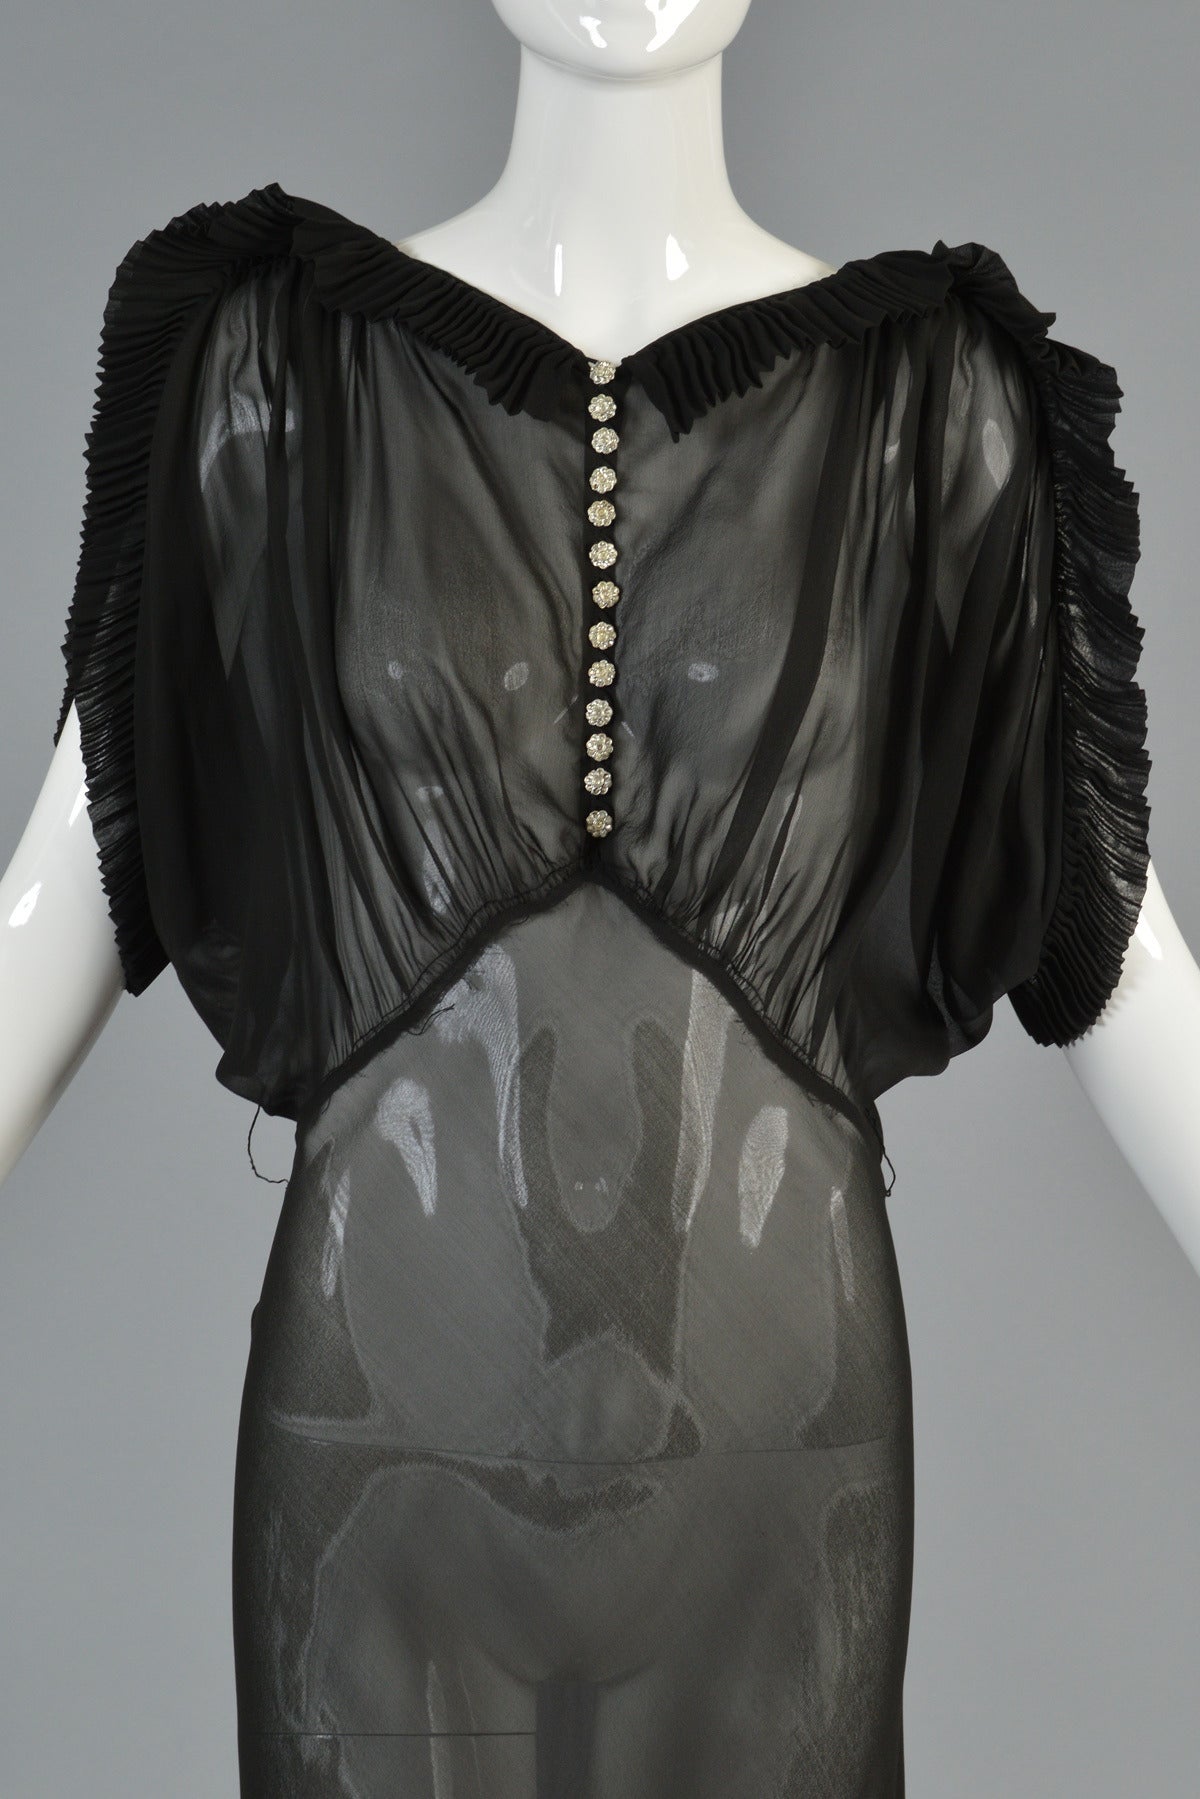 Women's 1930's Black Sheer Evening Gown with Open Draped Sleeves For Sale